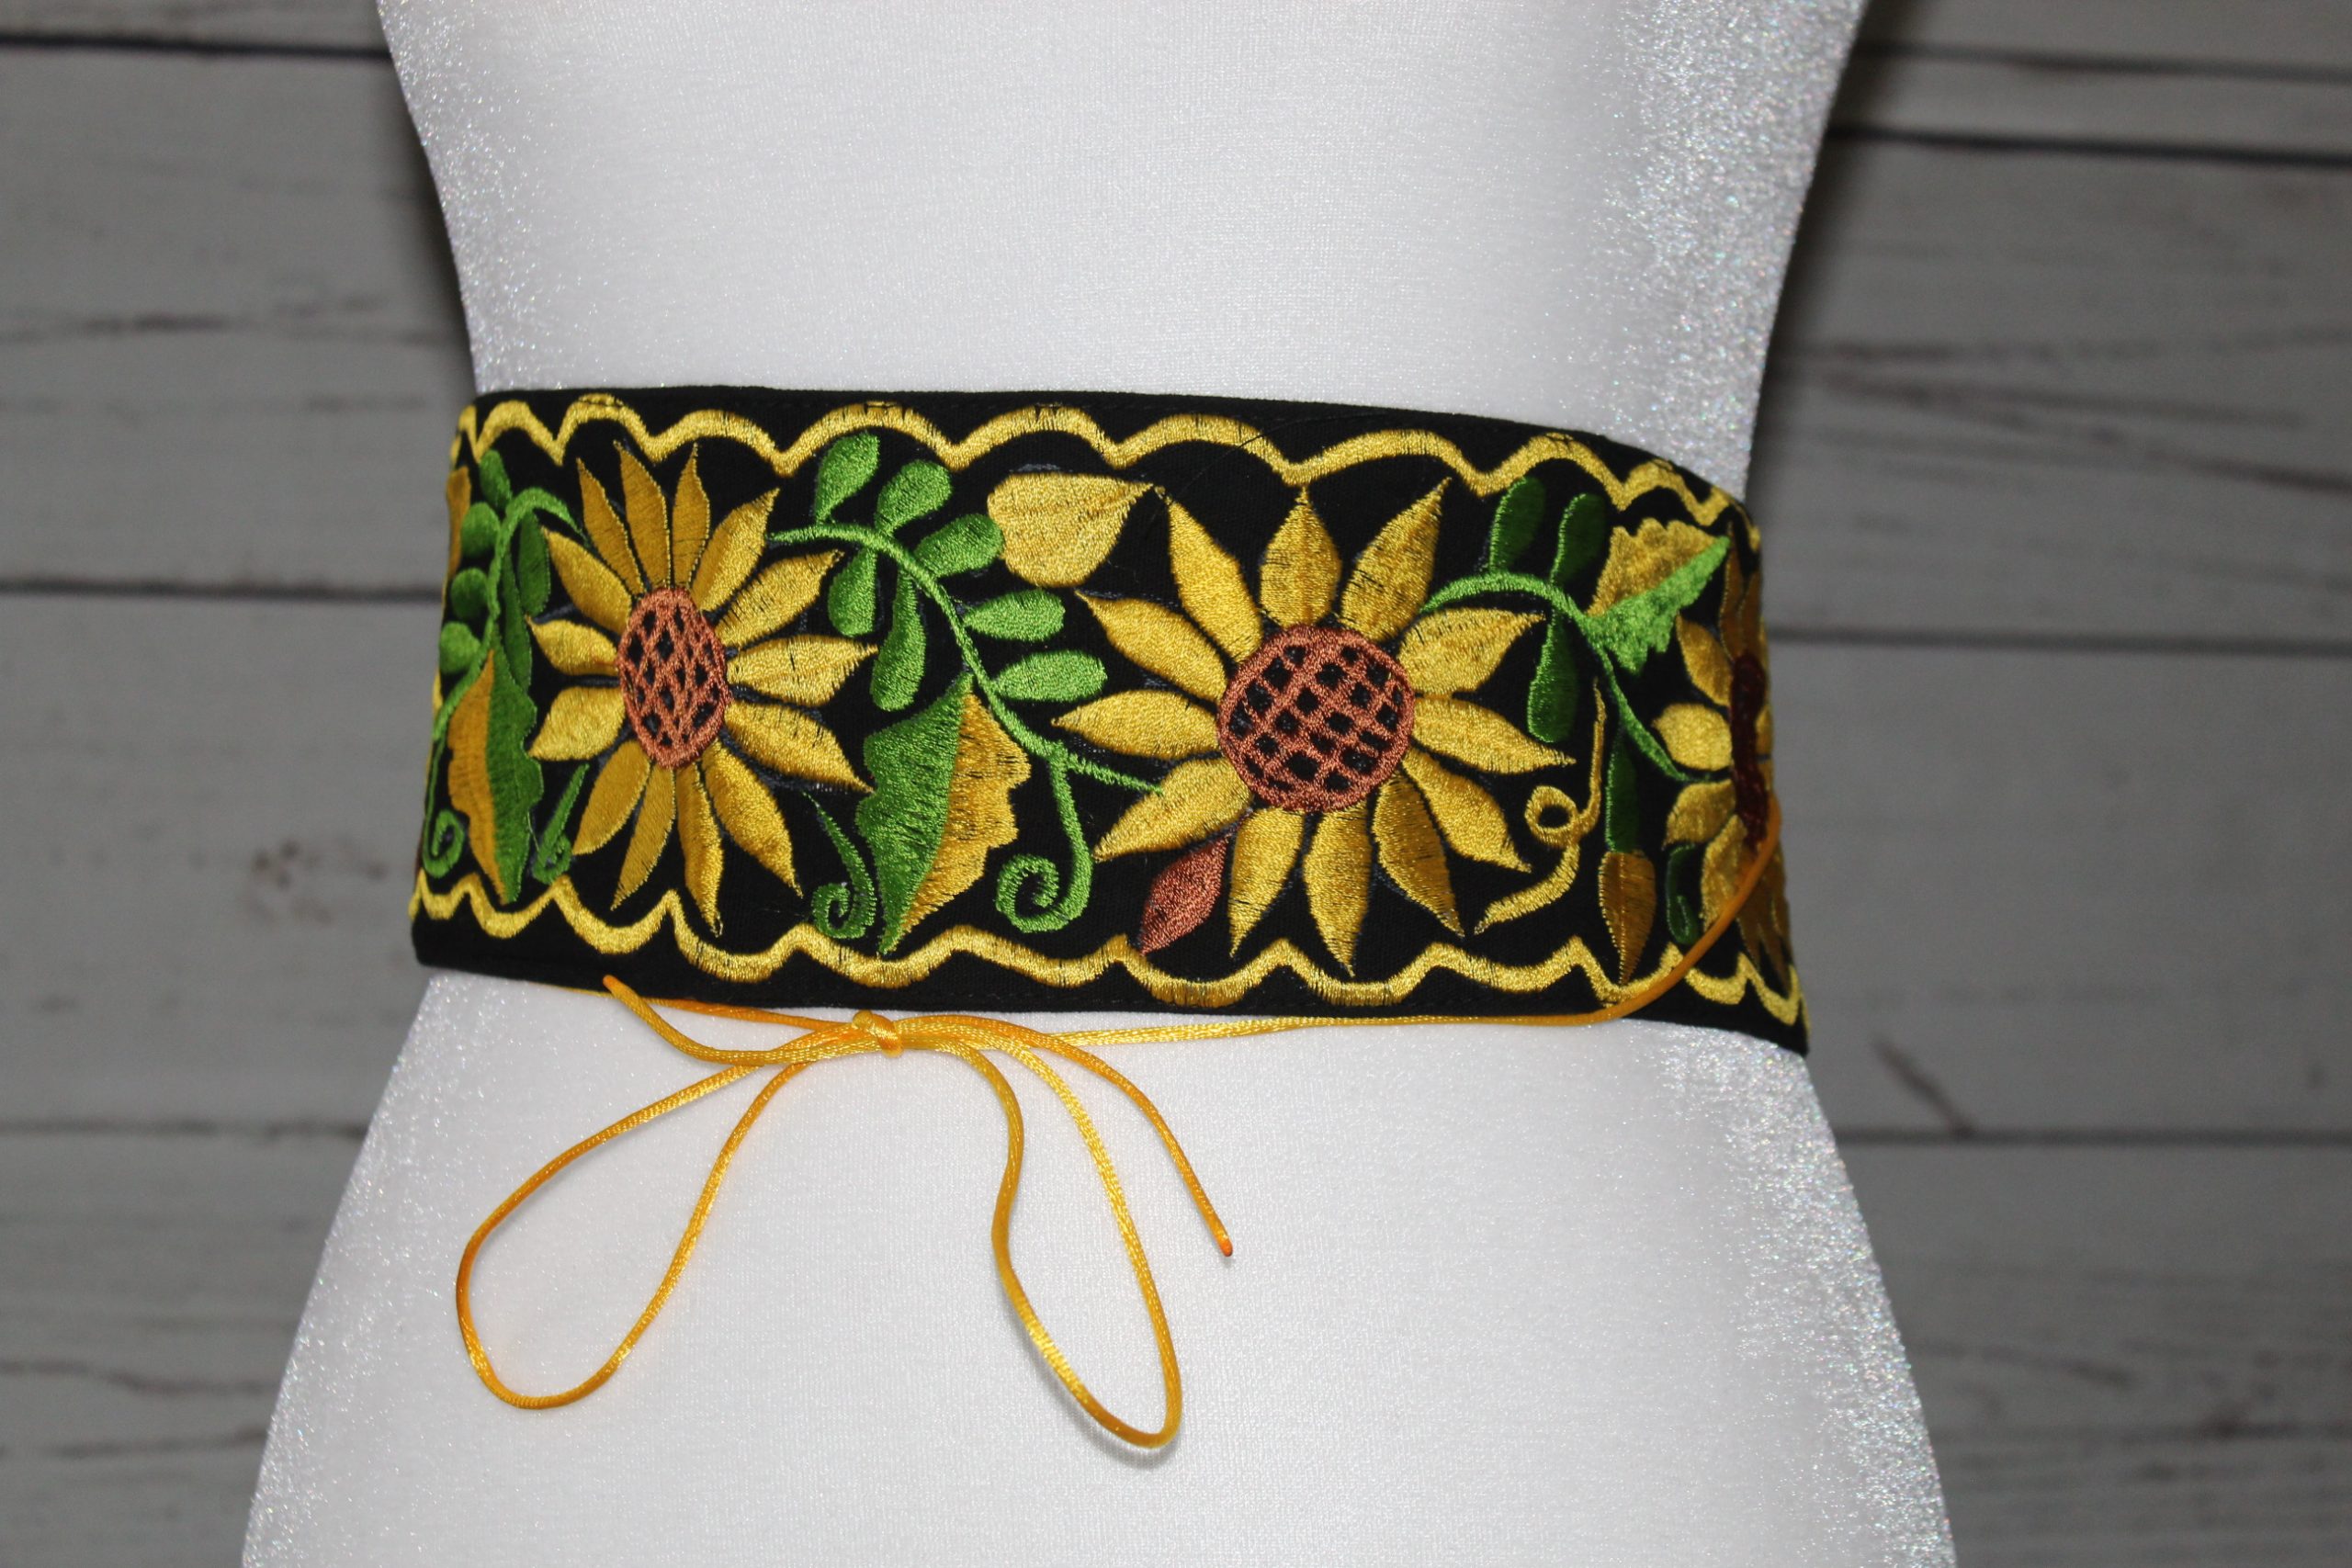 Black embordered belt with yellow sunflowers and yellow border